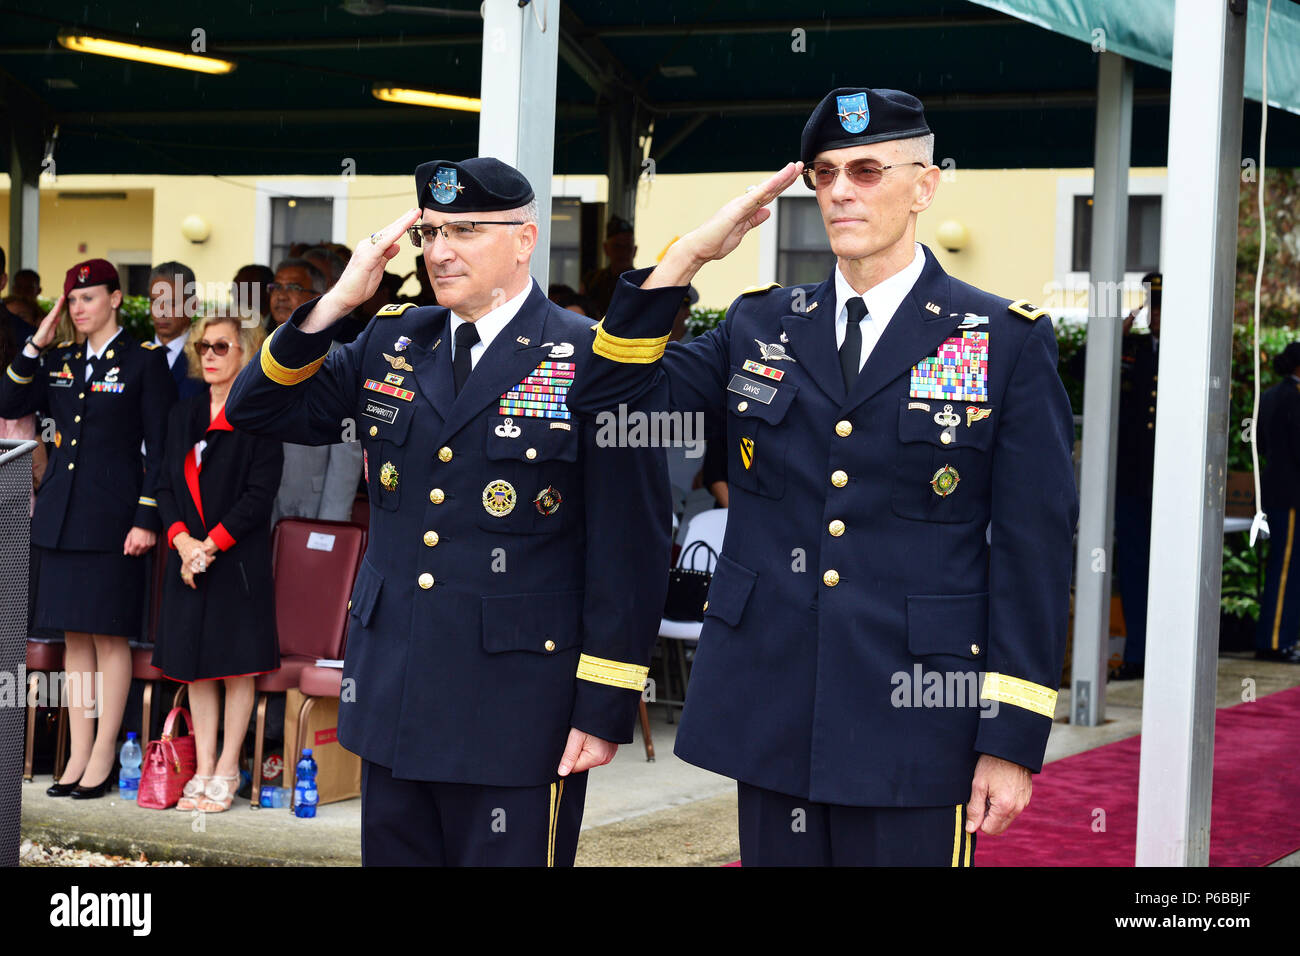 General Curtis M. Scaparrotti, Supreme Allied Commander Europe (SACEUR) commander (left), Maj. Gen. Gordon B. “Skip” Davis Jr., Combined Security Transition Command – Afghanistan, Commander (right), stand at attention during a retirement ceremony at Caserma C. Ederle Vicenza, Italy, June 22, 2018. (U.S. Army photo by Paolo Bovo). Stock Photo